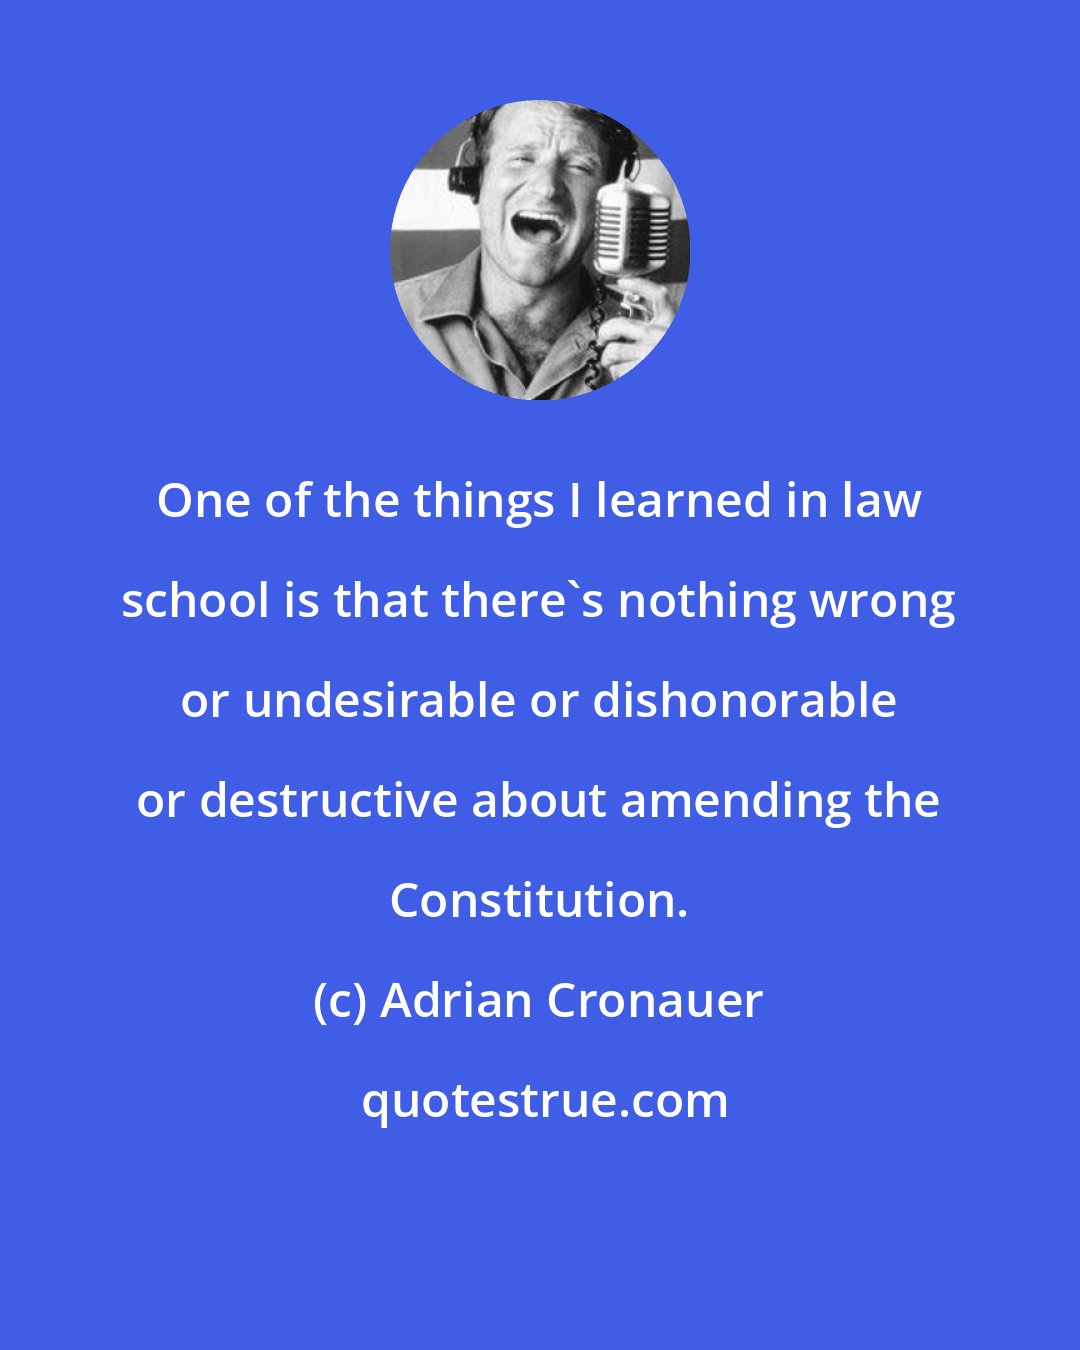 Adrian Cronauer: One of the things I learned in law school is that there's nothing wrong or undesirable or dishonorable or destructive about amending the Constitution.